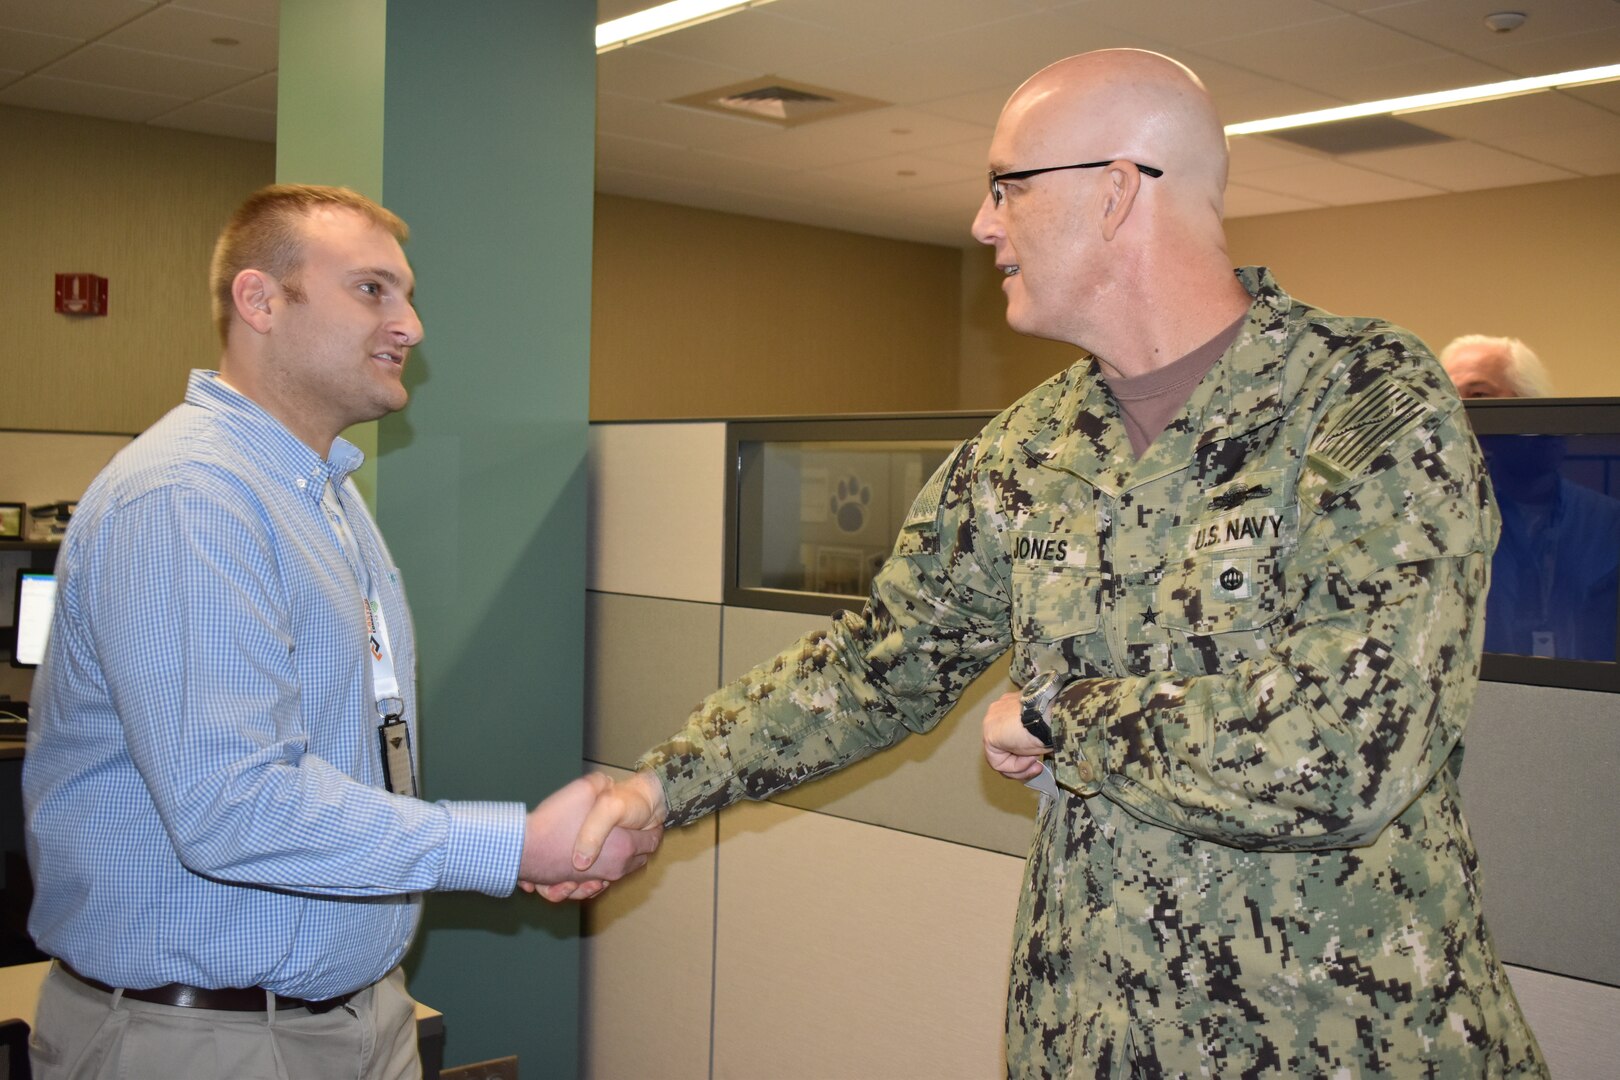 Distribution’s Marshall presented commander’s coin